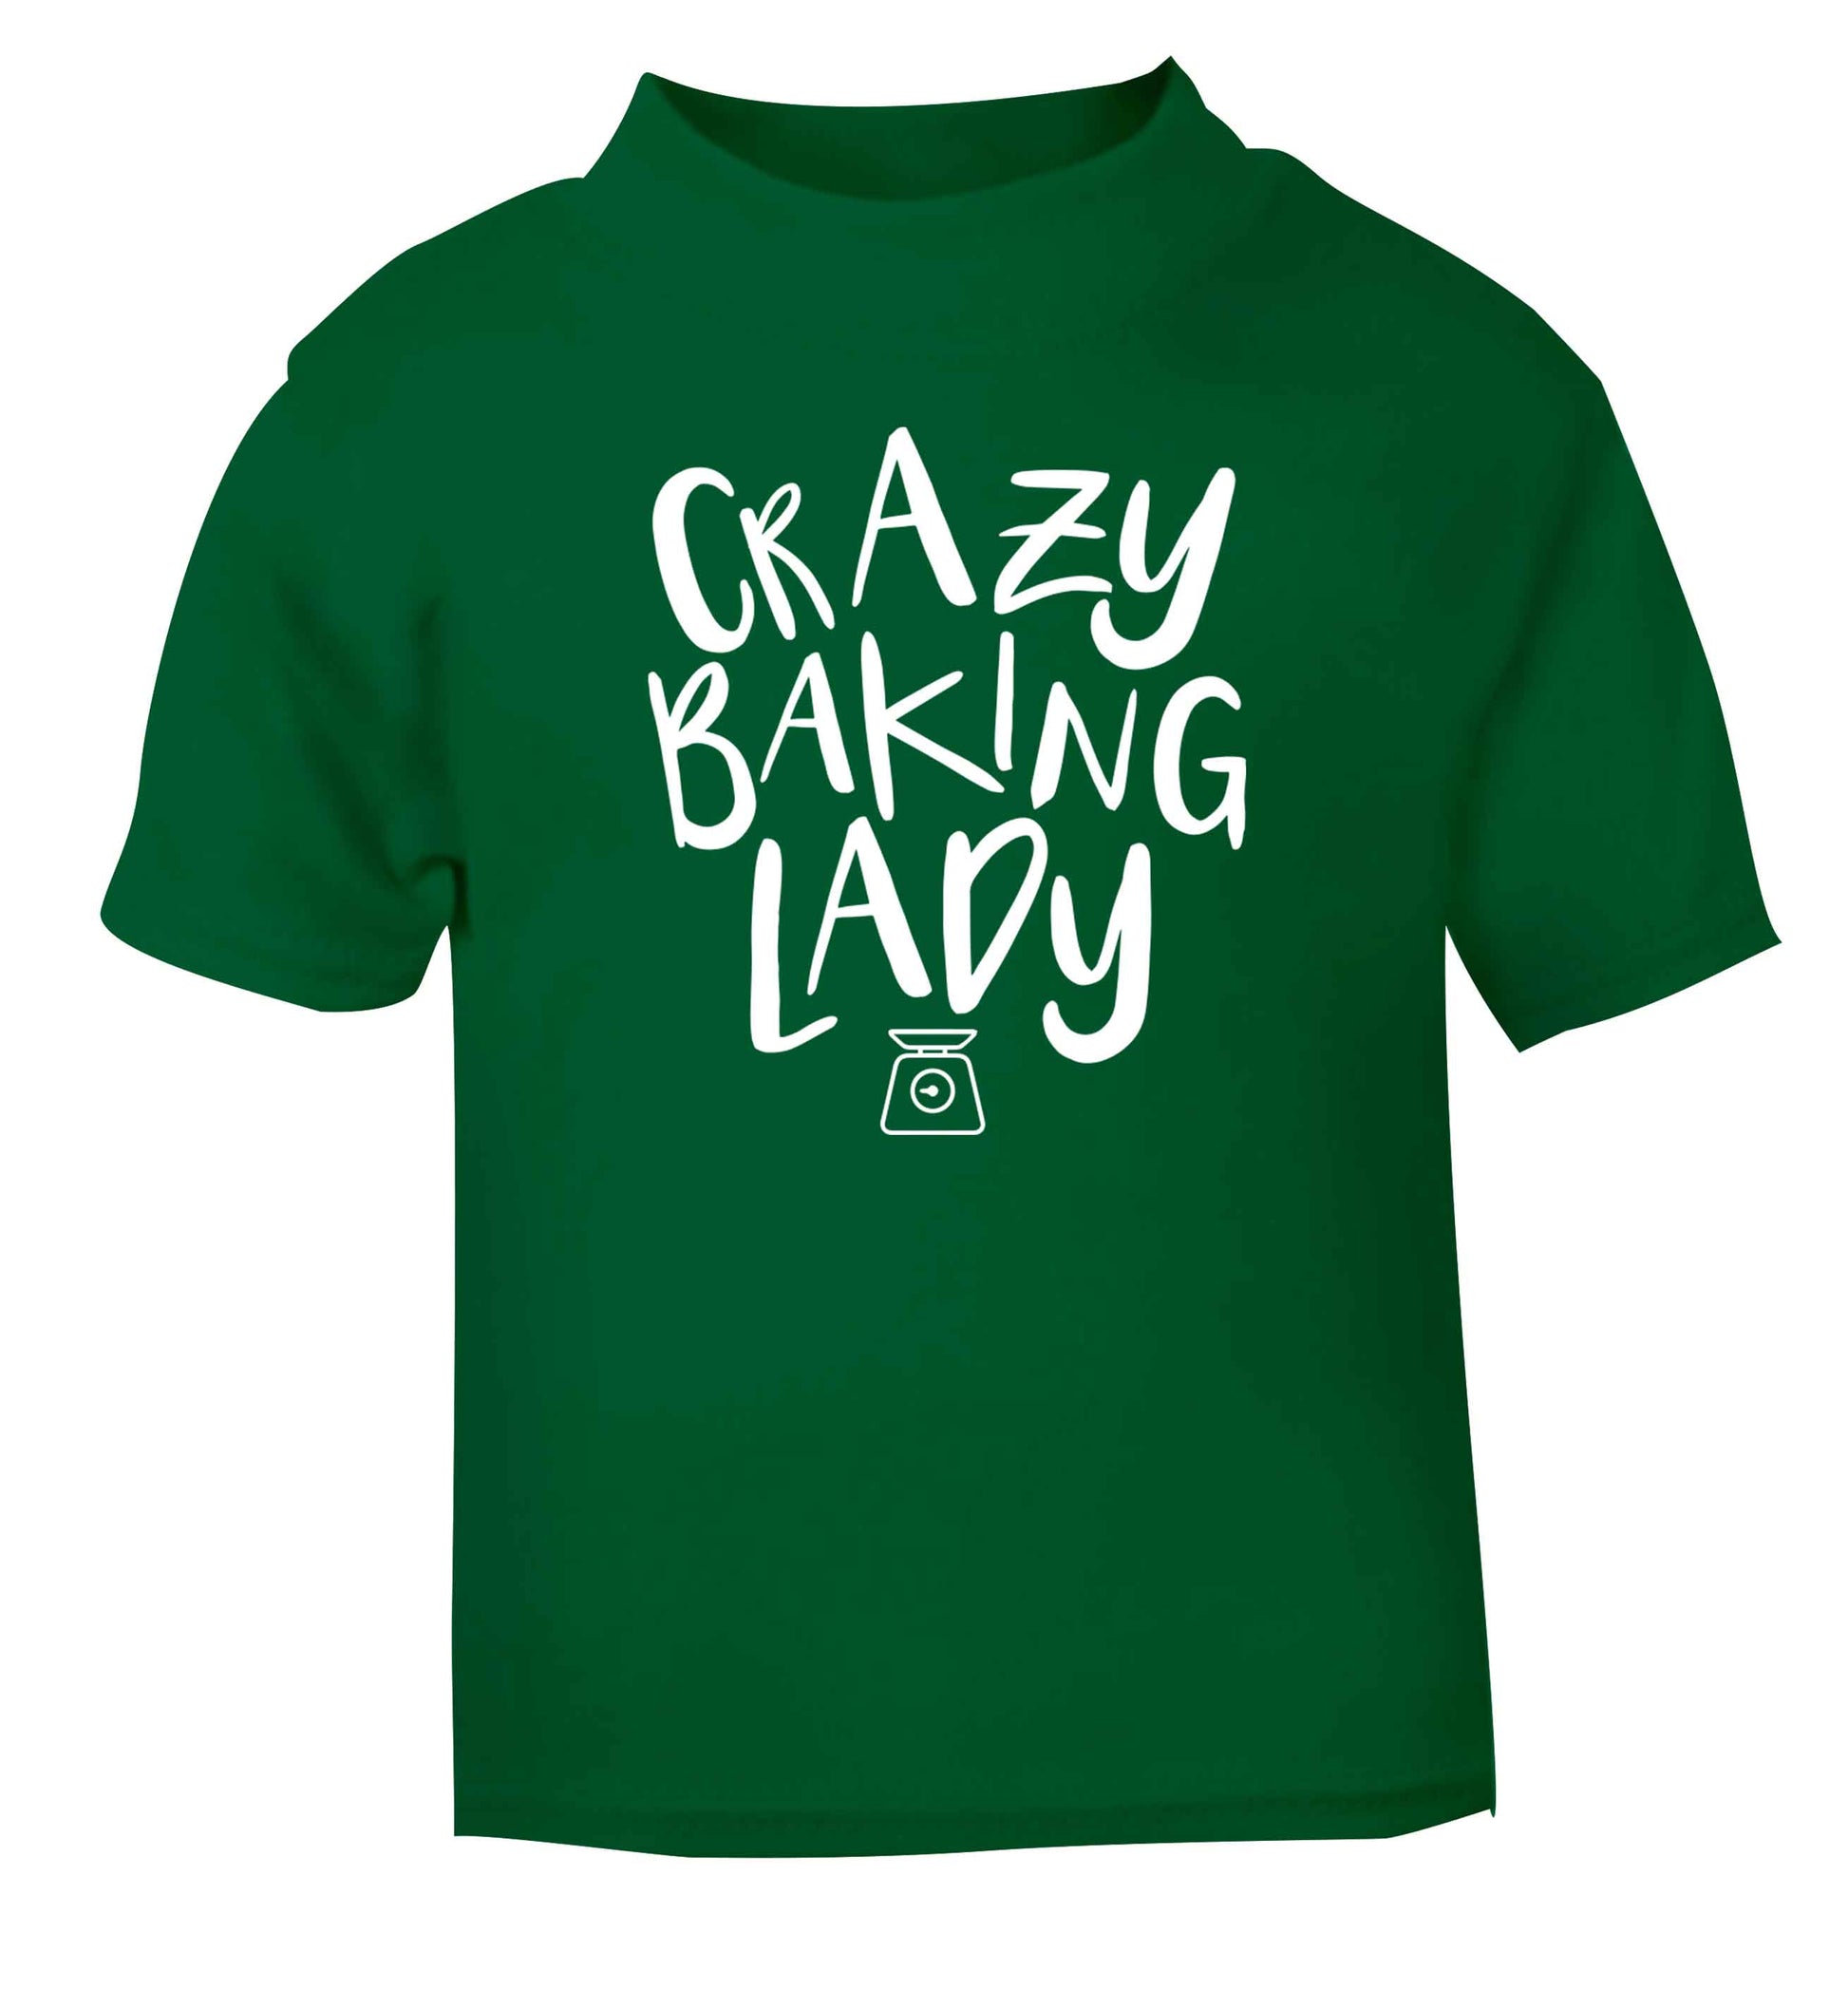 Crazy baking lady green Baby Toddler Tshirt 2 Years